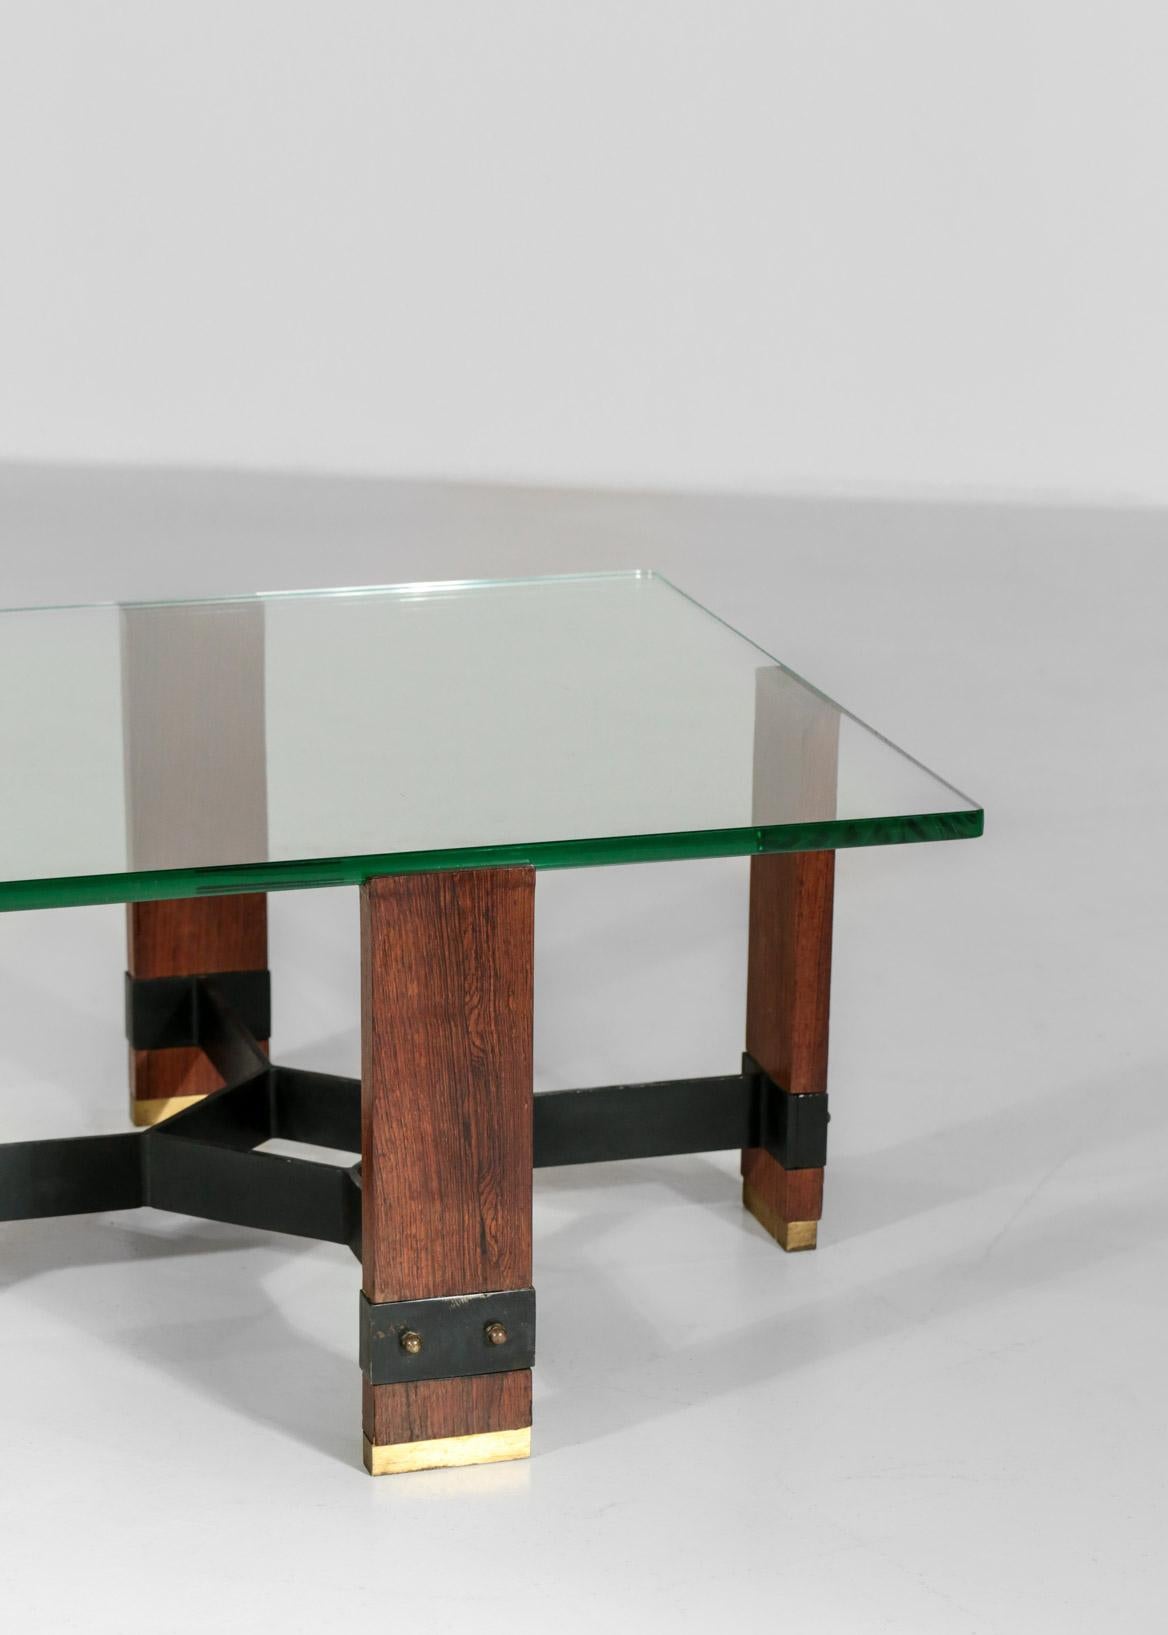 European Modernist Coffee Table, Italy, 1950s For Sale